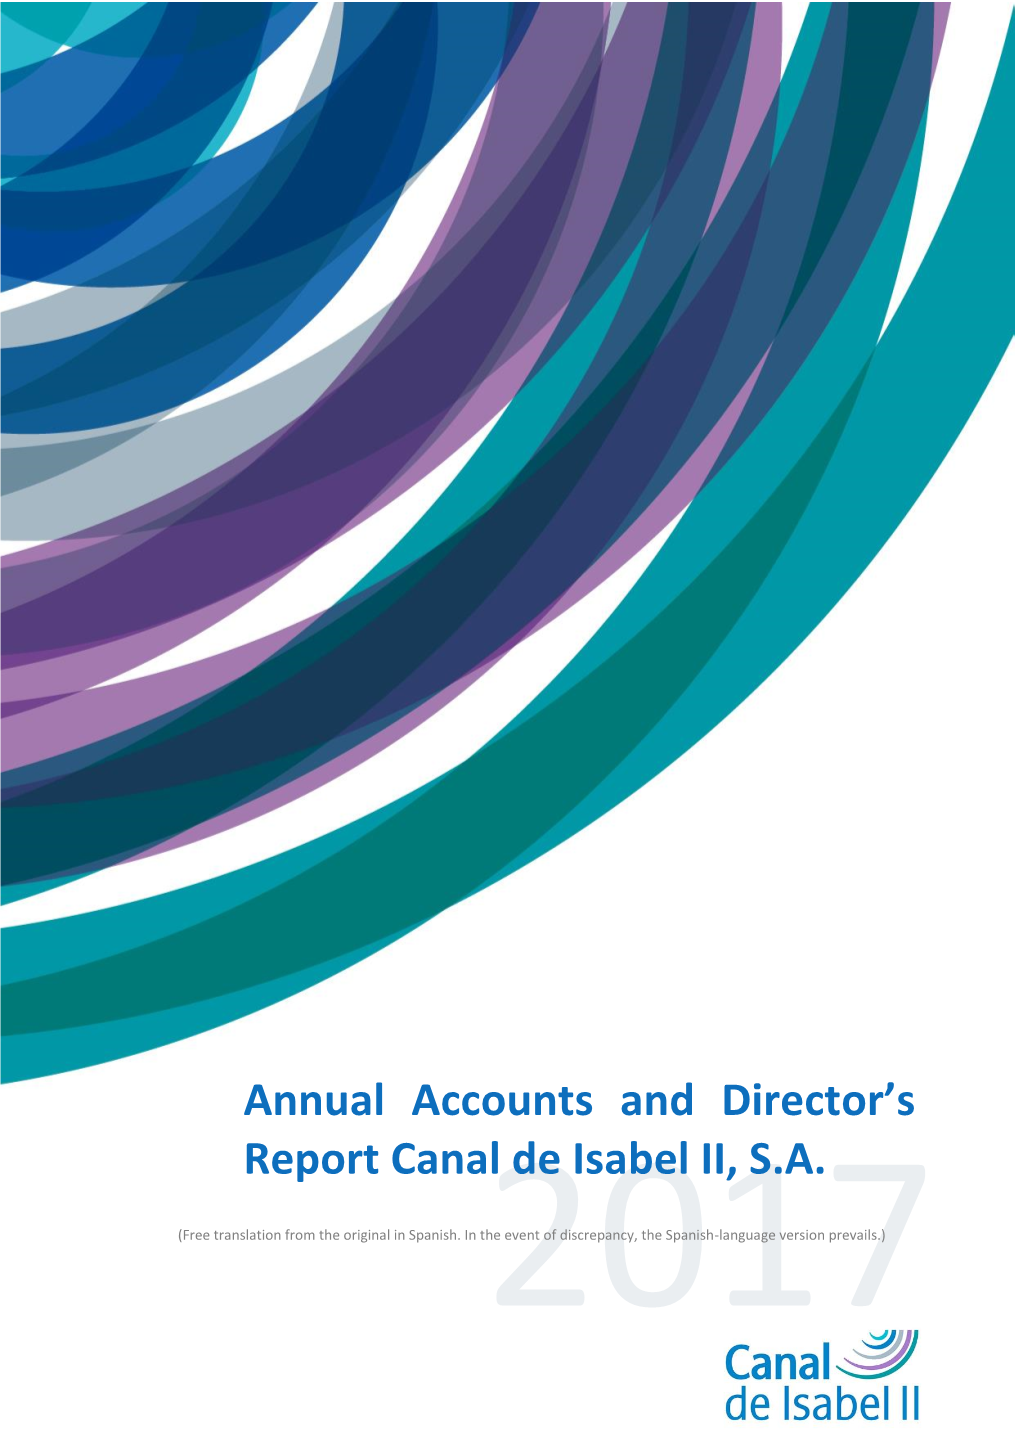 Annual Accounts and Director's Report Canal De Isabel II, S.A